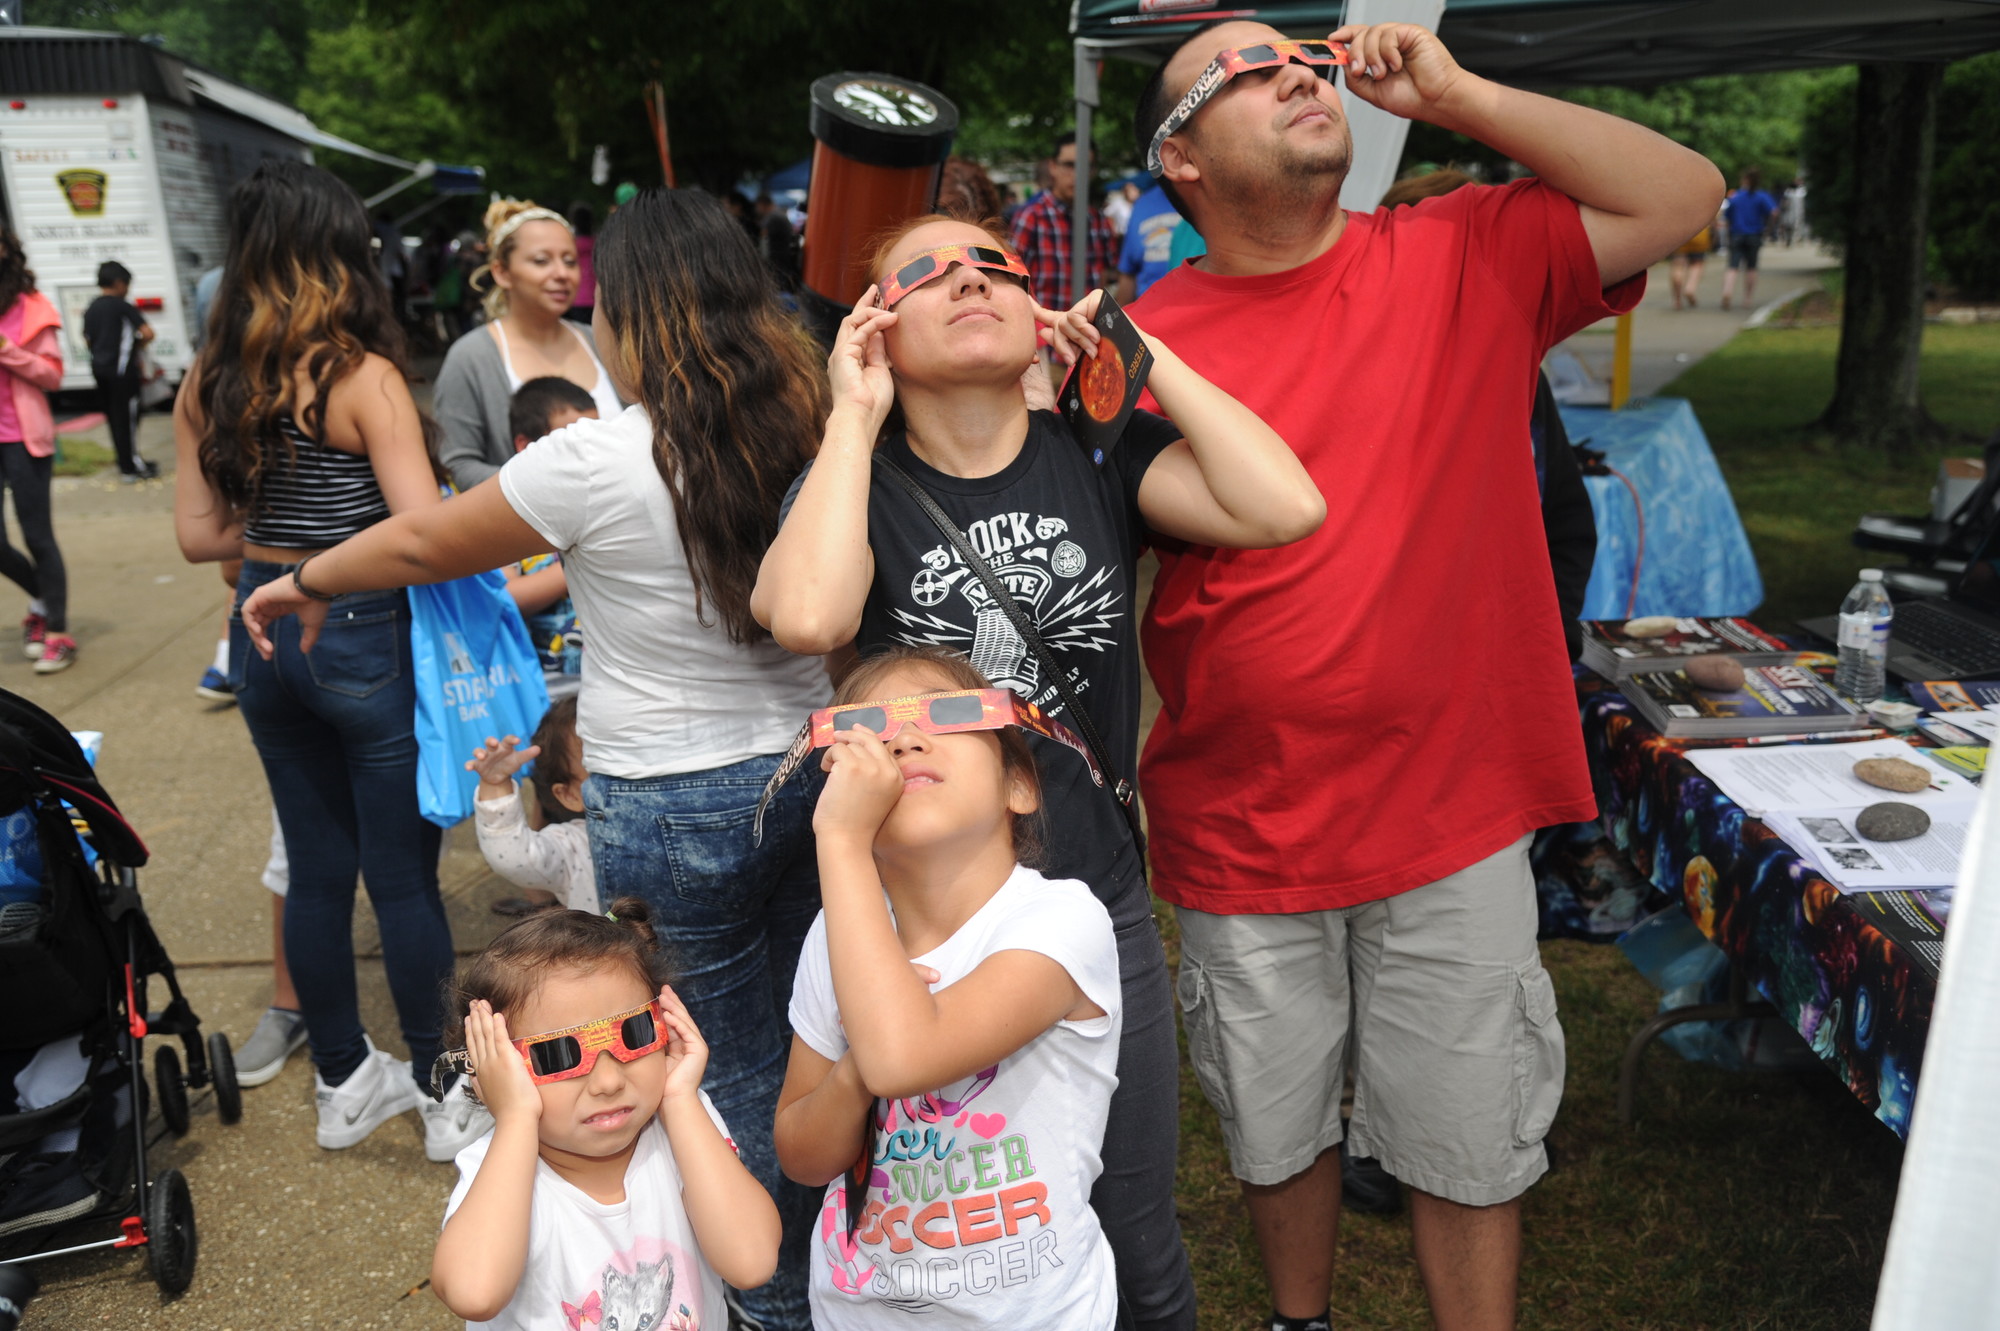 Nicole and Allison Garcia, and their parents Sandra and Walter, viewed the sky from a brand new perspective while at the booth for the Amateur Observers Society of New York.